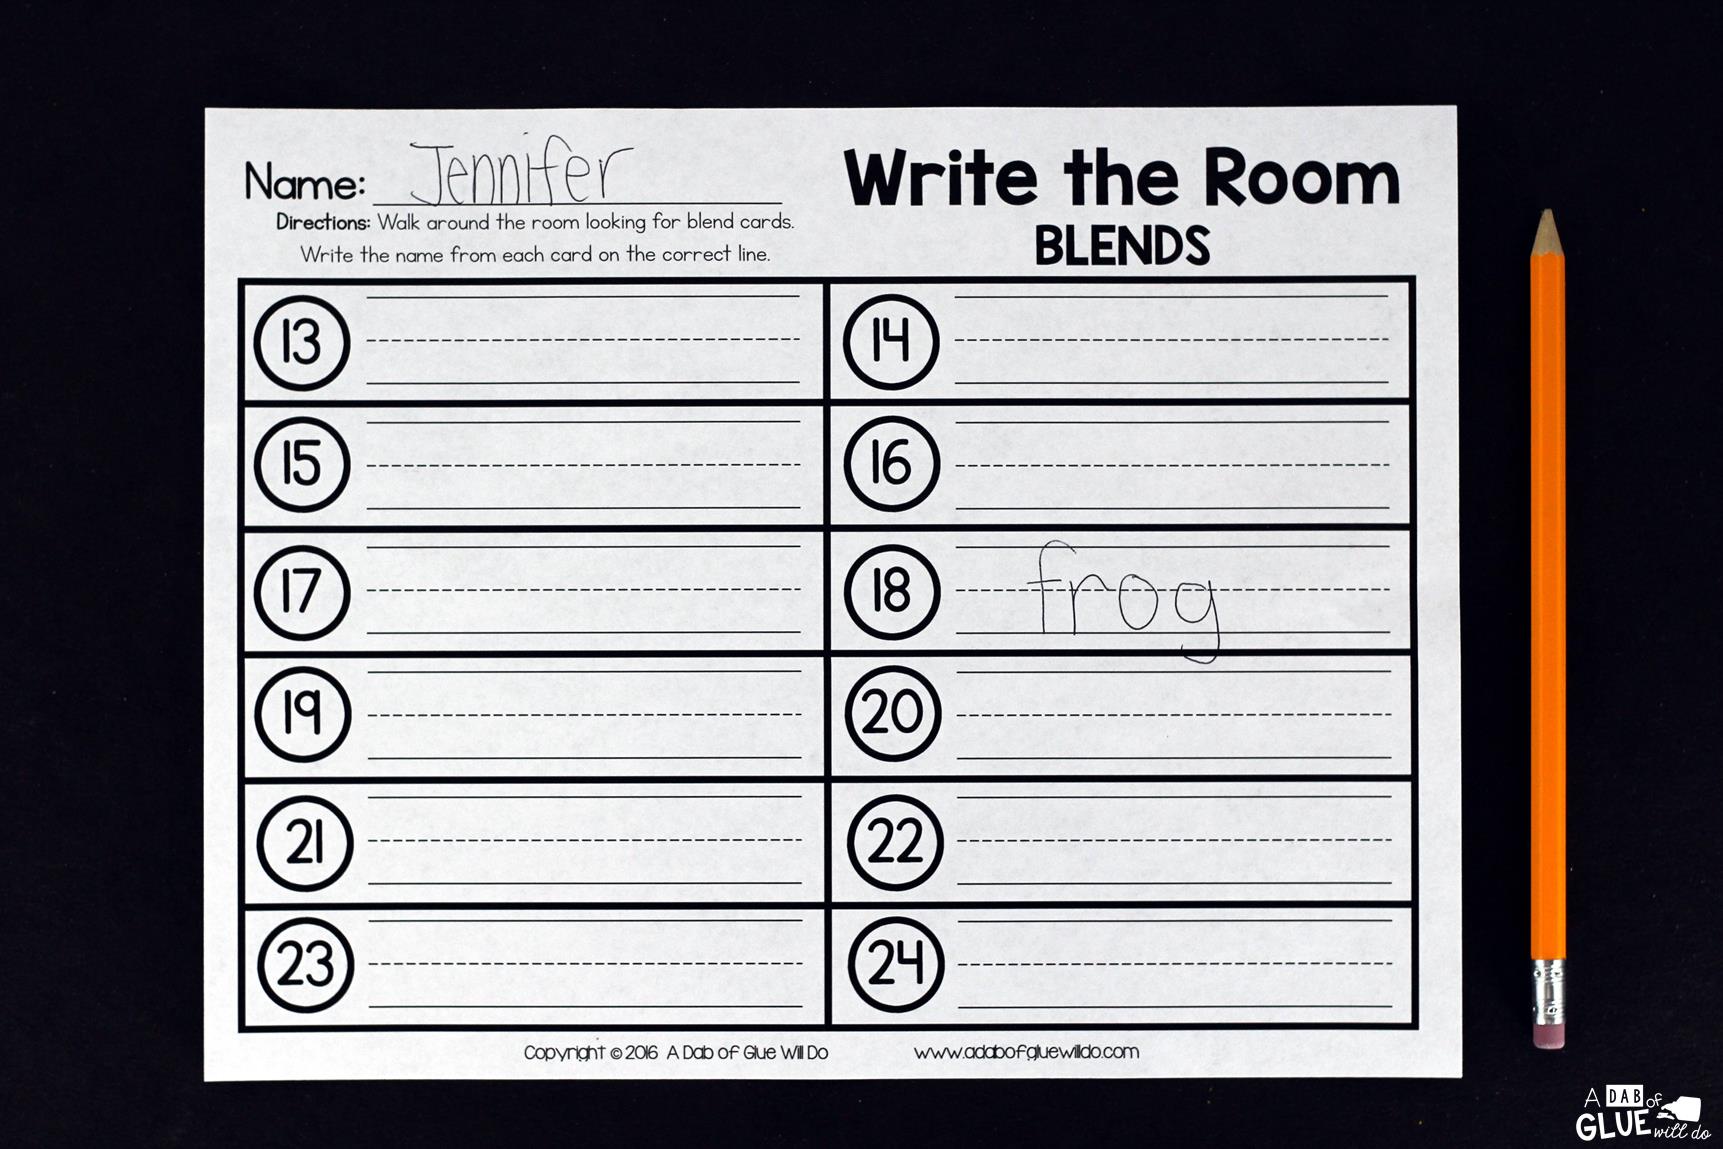 Write the Room Blends is the perfect literacy center that combine movement and learning, while having fun learning. This free printable is perfect for preschool, kindergarten, and first grade students. 